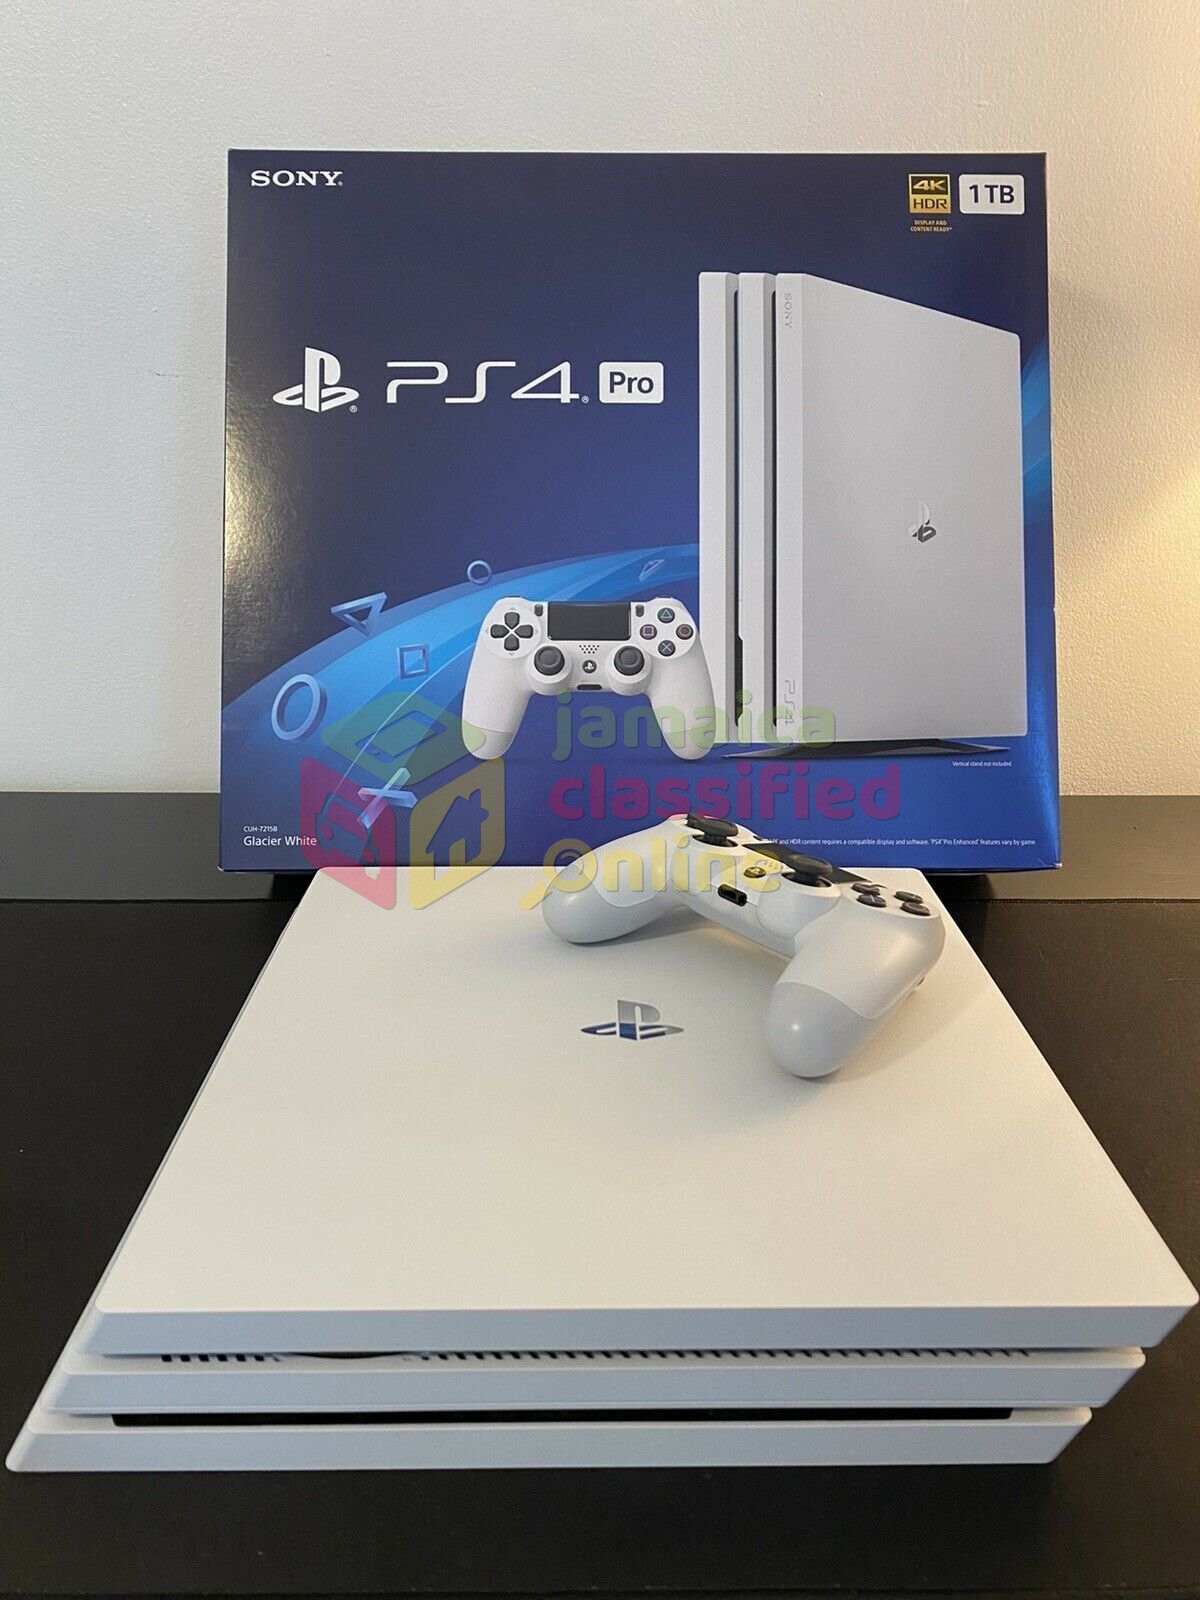 Sony Playstation 4 Pro 1TB Console for sale in Montego Bay Kingston St